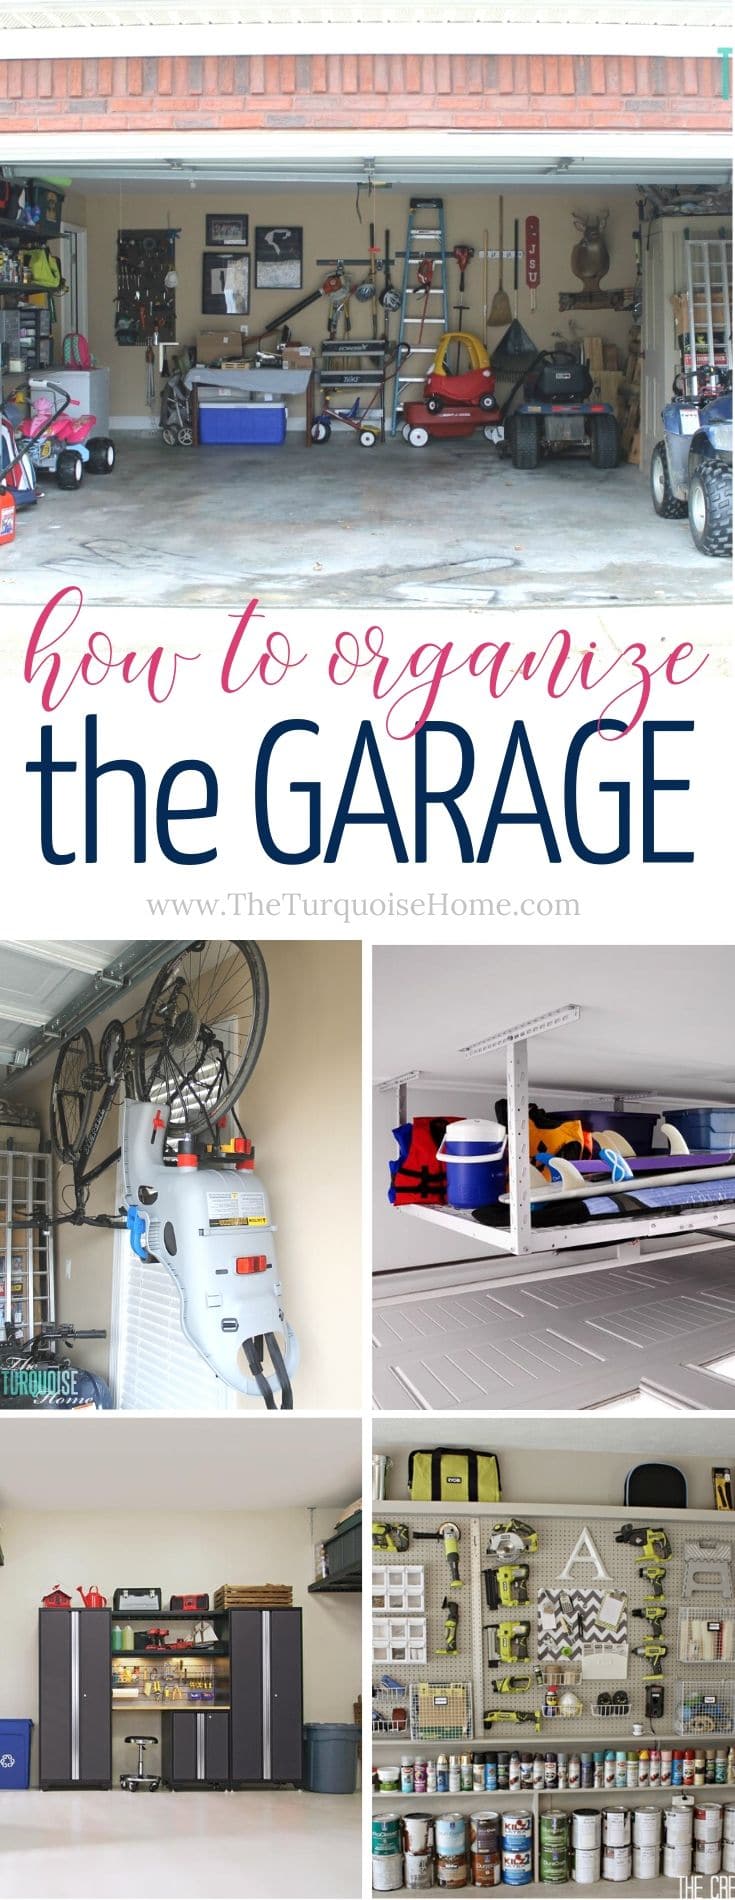 Top 10 Family Command Centers to Get Organized | The Turquoise Home